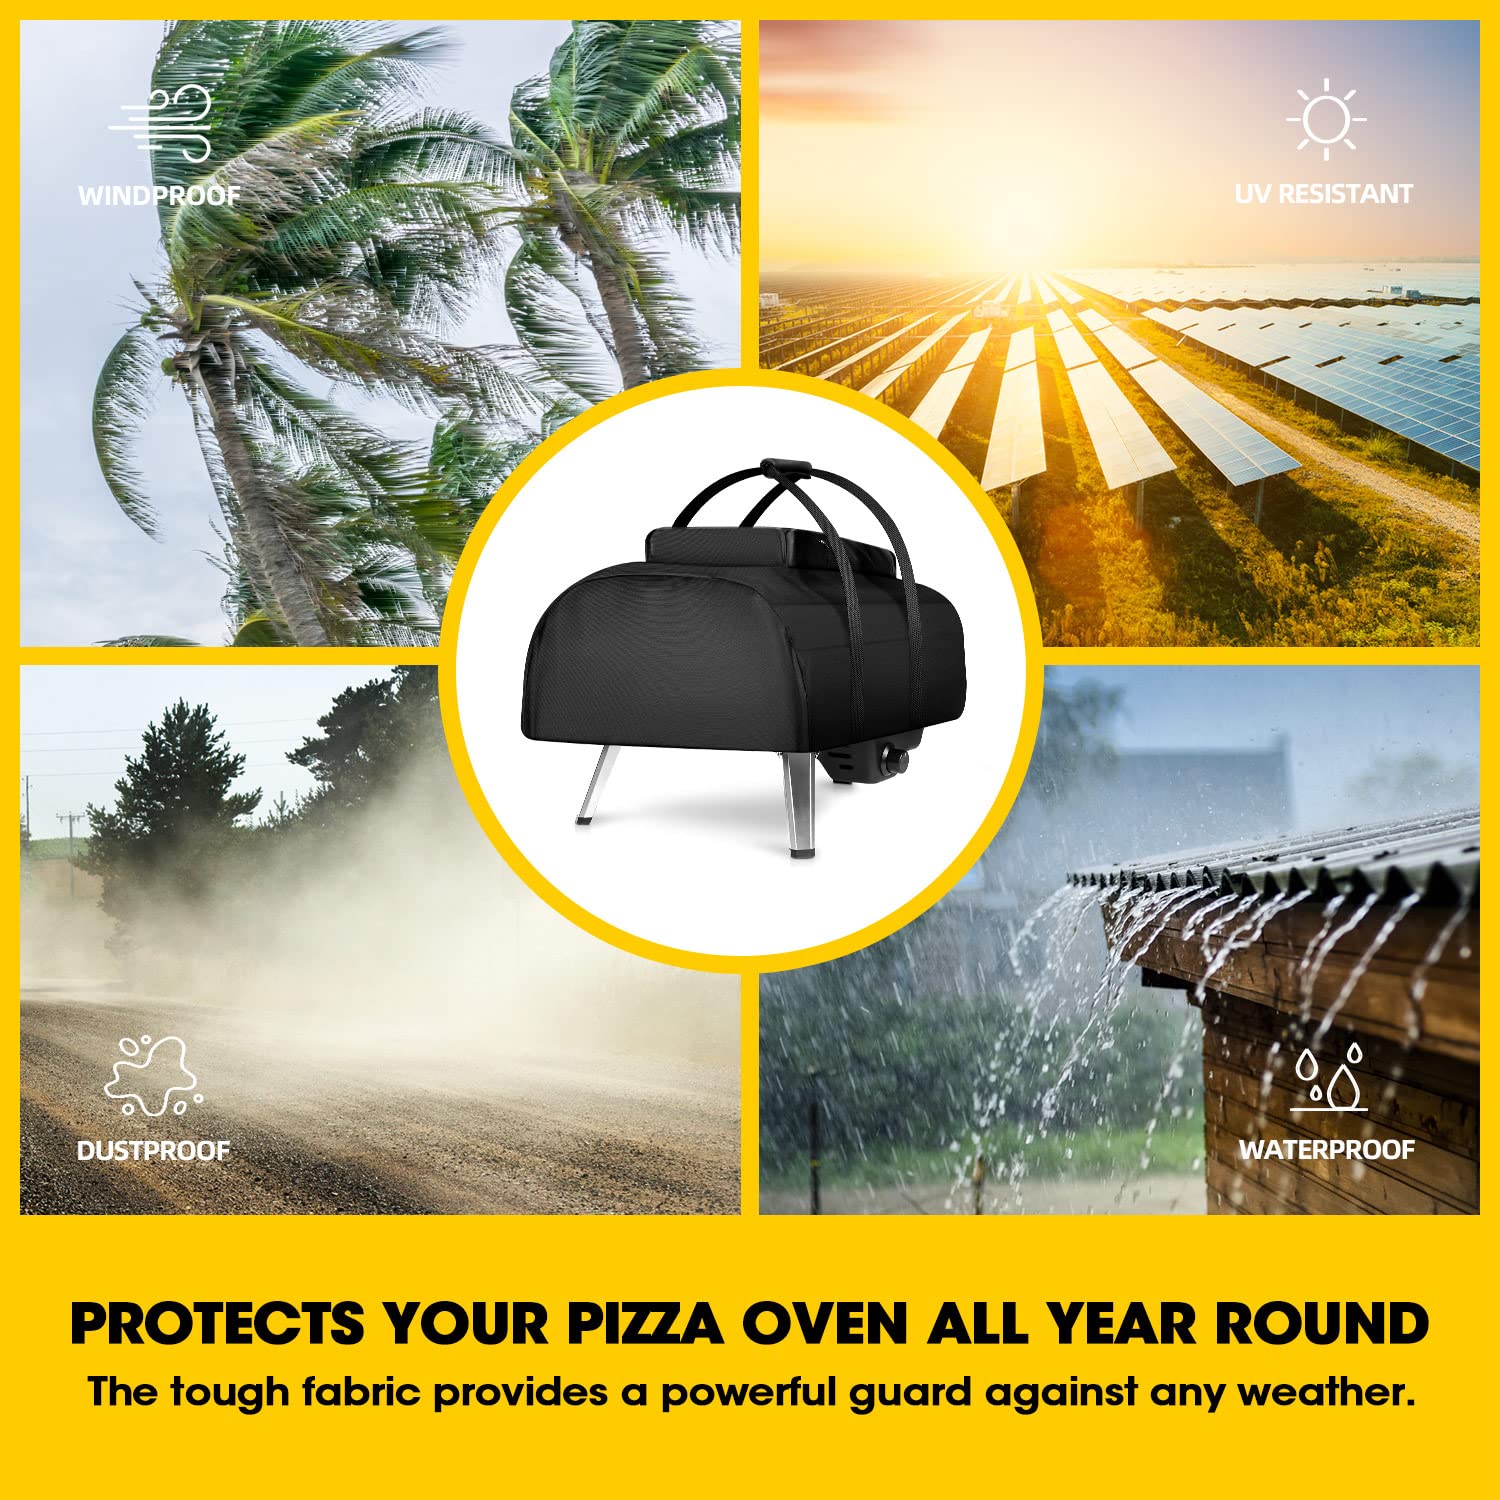 ANZOME Pizza Oven Carrying Cover, Pizza Oven Carry Cover for Ooni Koda 12 and 16 Pizza Oven, Waterproof Pizza Oven Portable Cover for Outdoor Pizza Oven Accessories for Ooni Koda 12 and 16